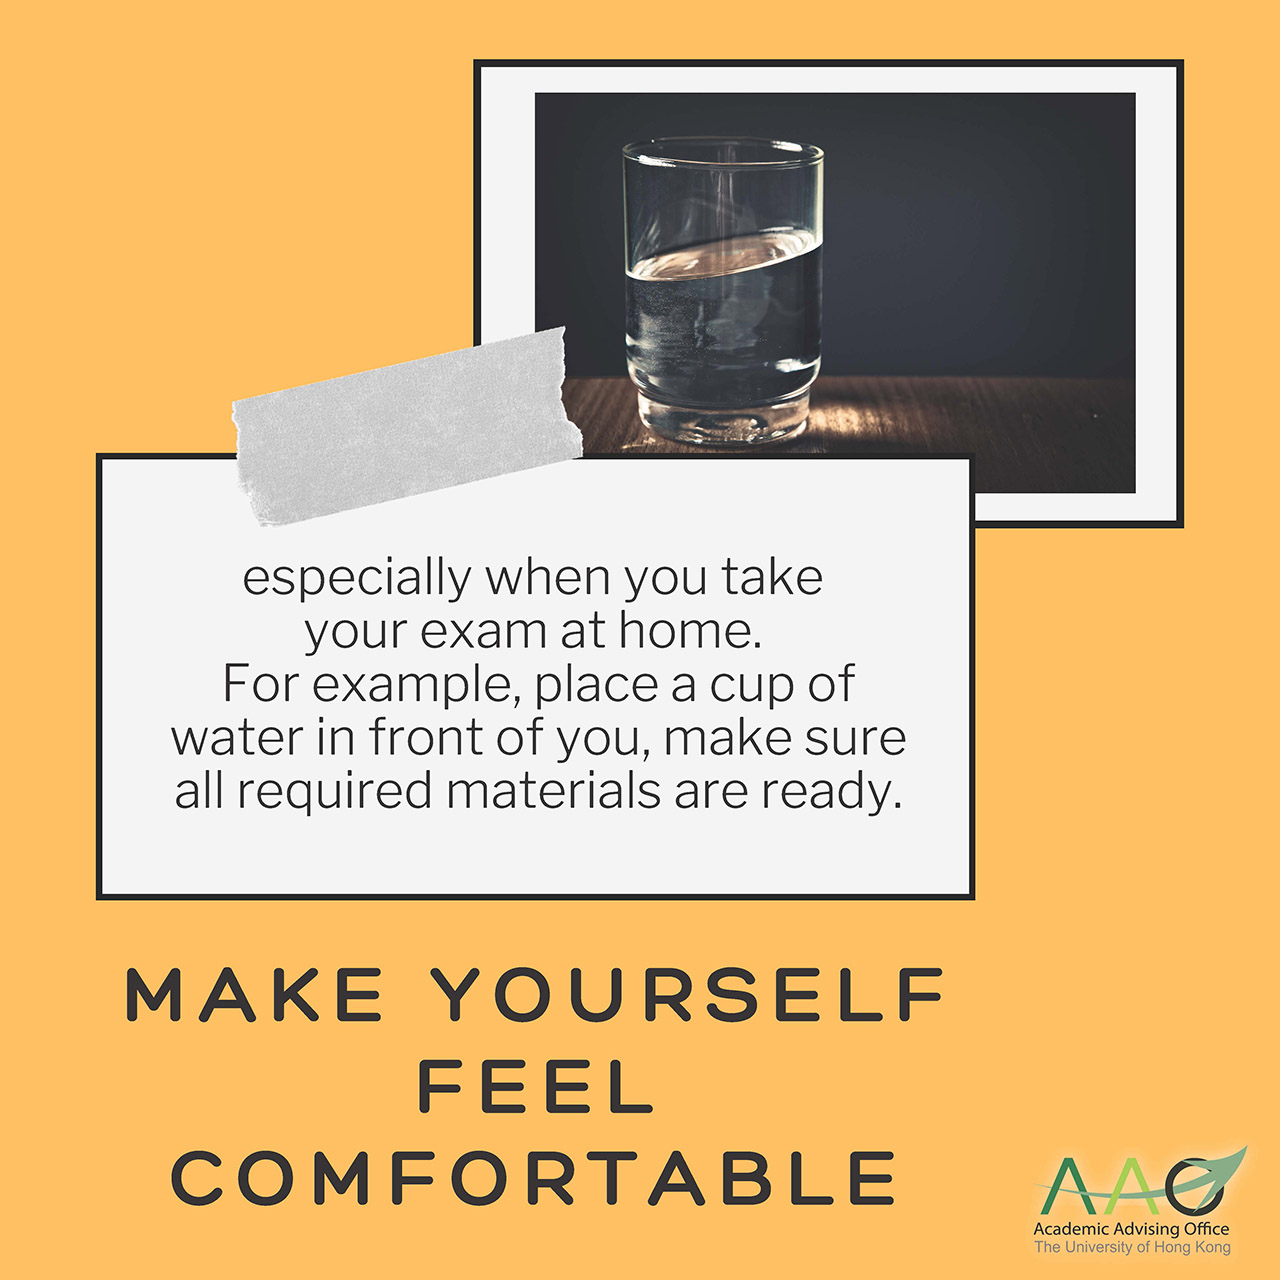 Make yourself feel comfortable, especially when you take your exam at home. For example, place a cup of water in front of you, make sure all required materials are ready.